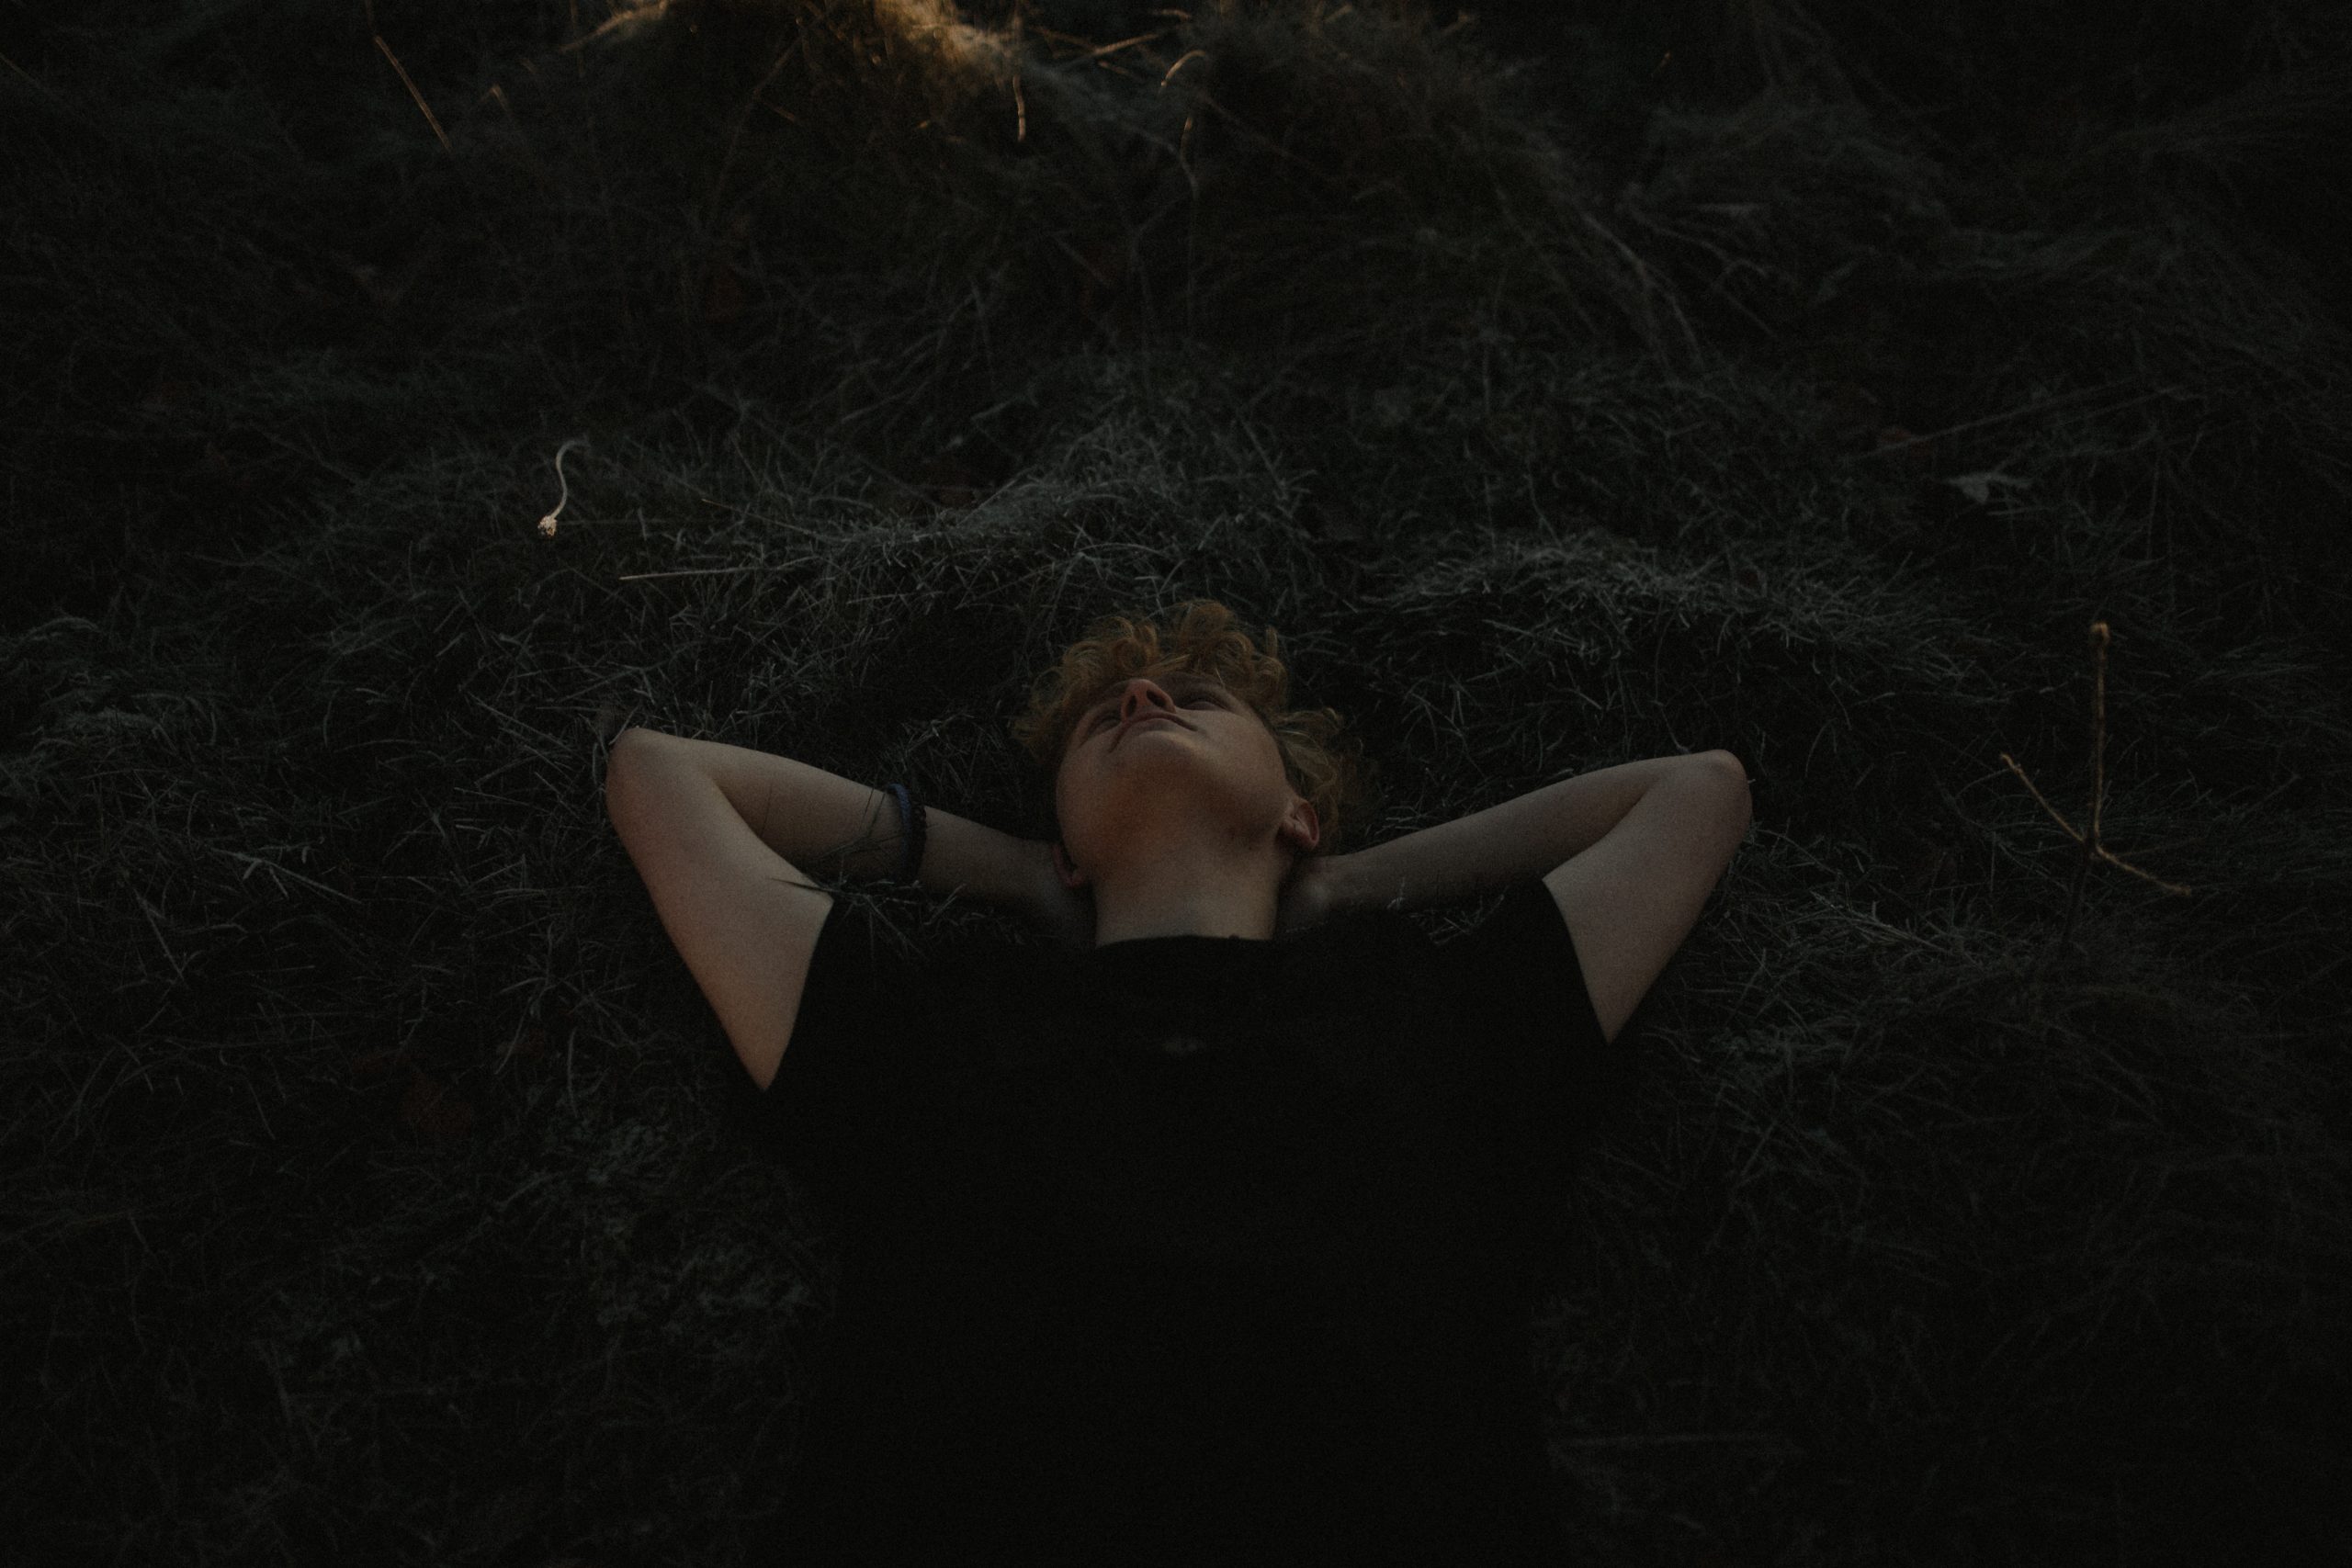 A boy laying in a field of dark crass, hands behind his head.